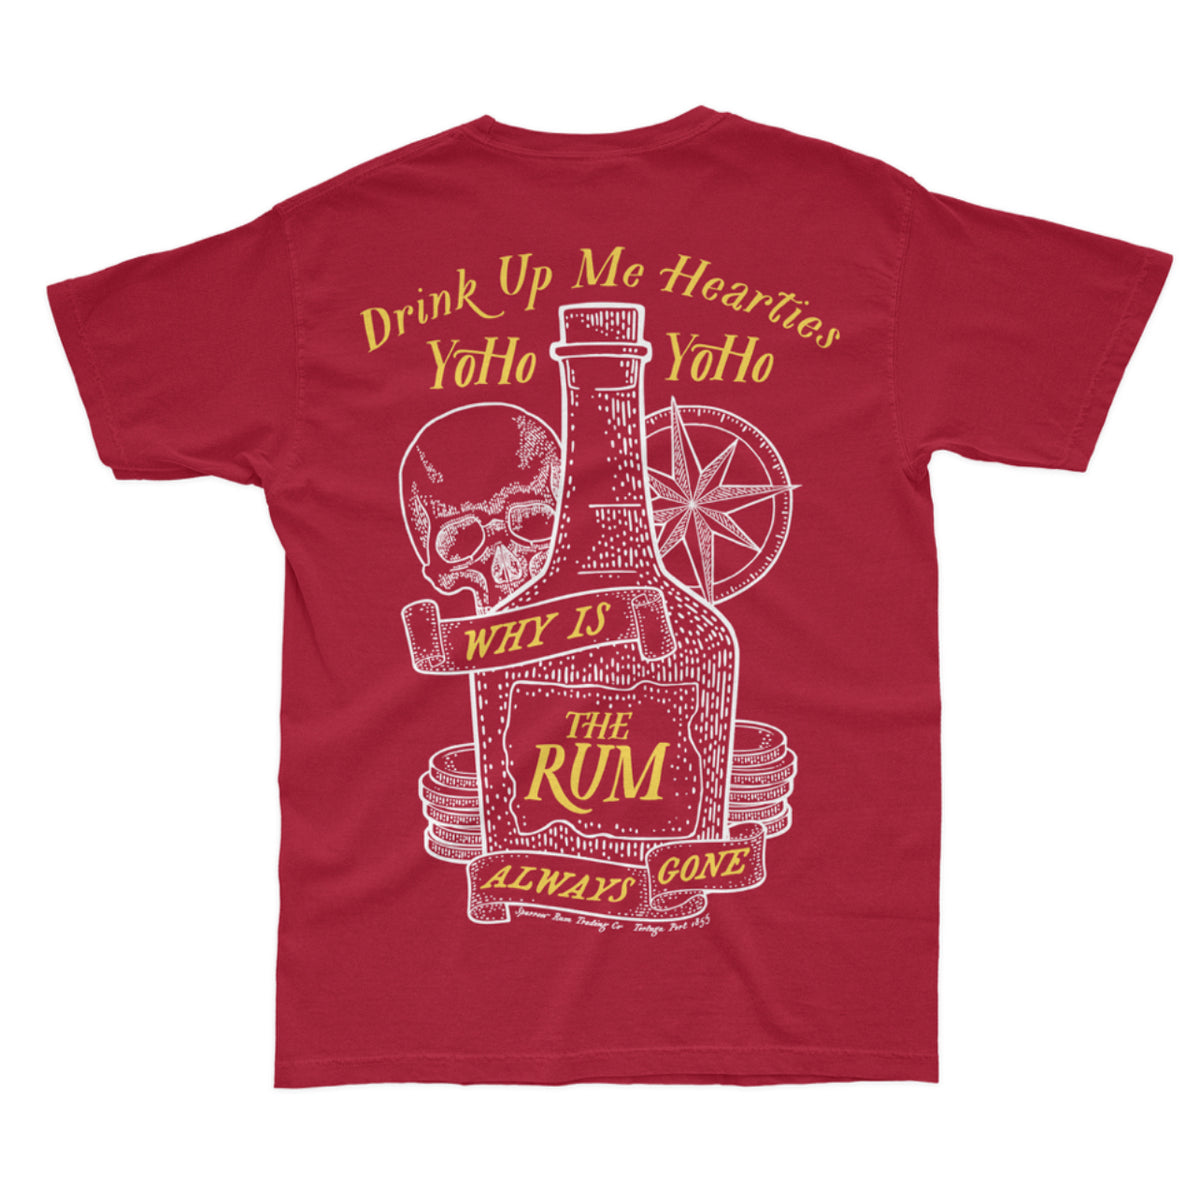 Why is the Rum Always Gone Tee